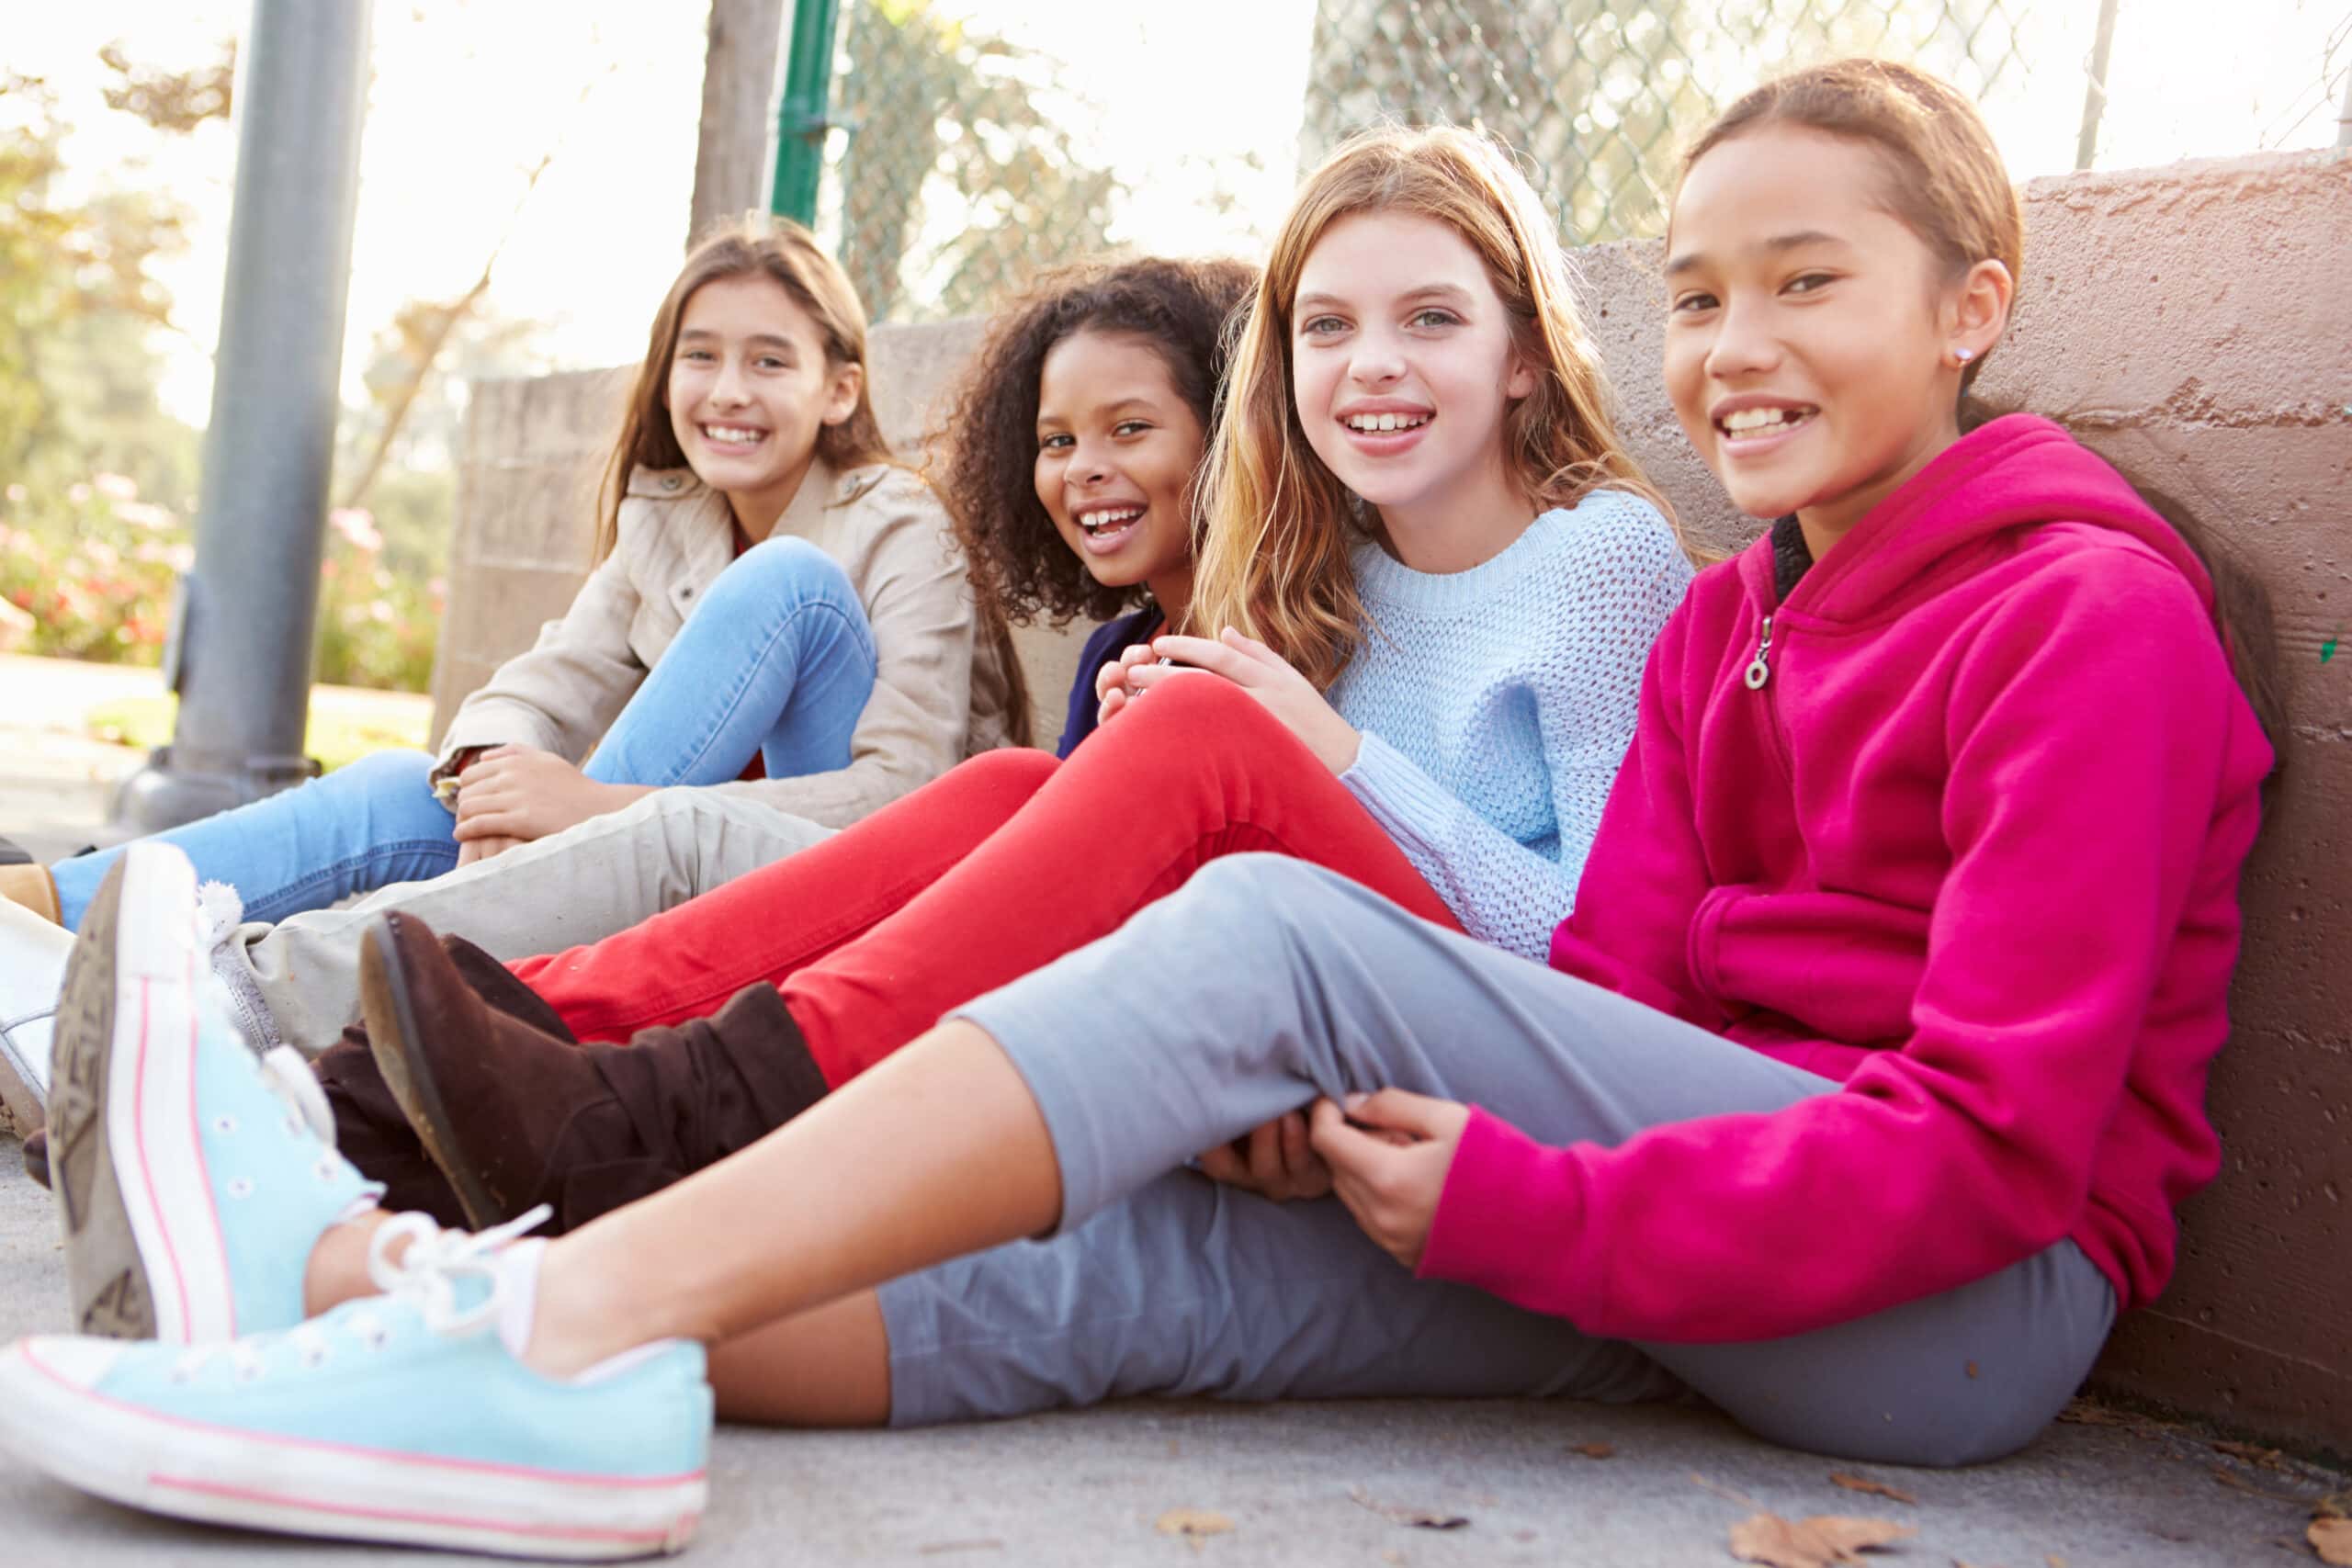 Four Young Girls Hanging Out Together In Park